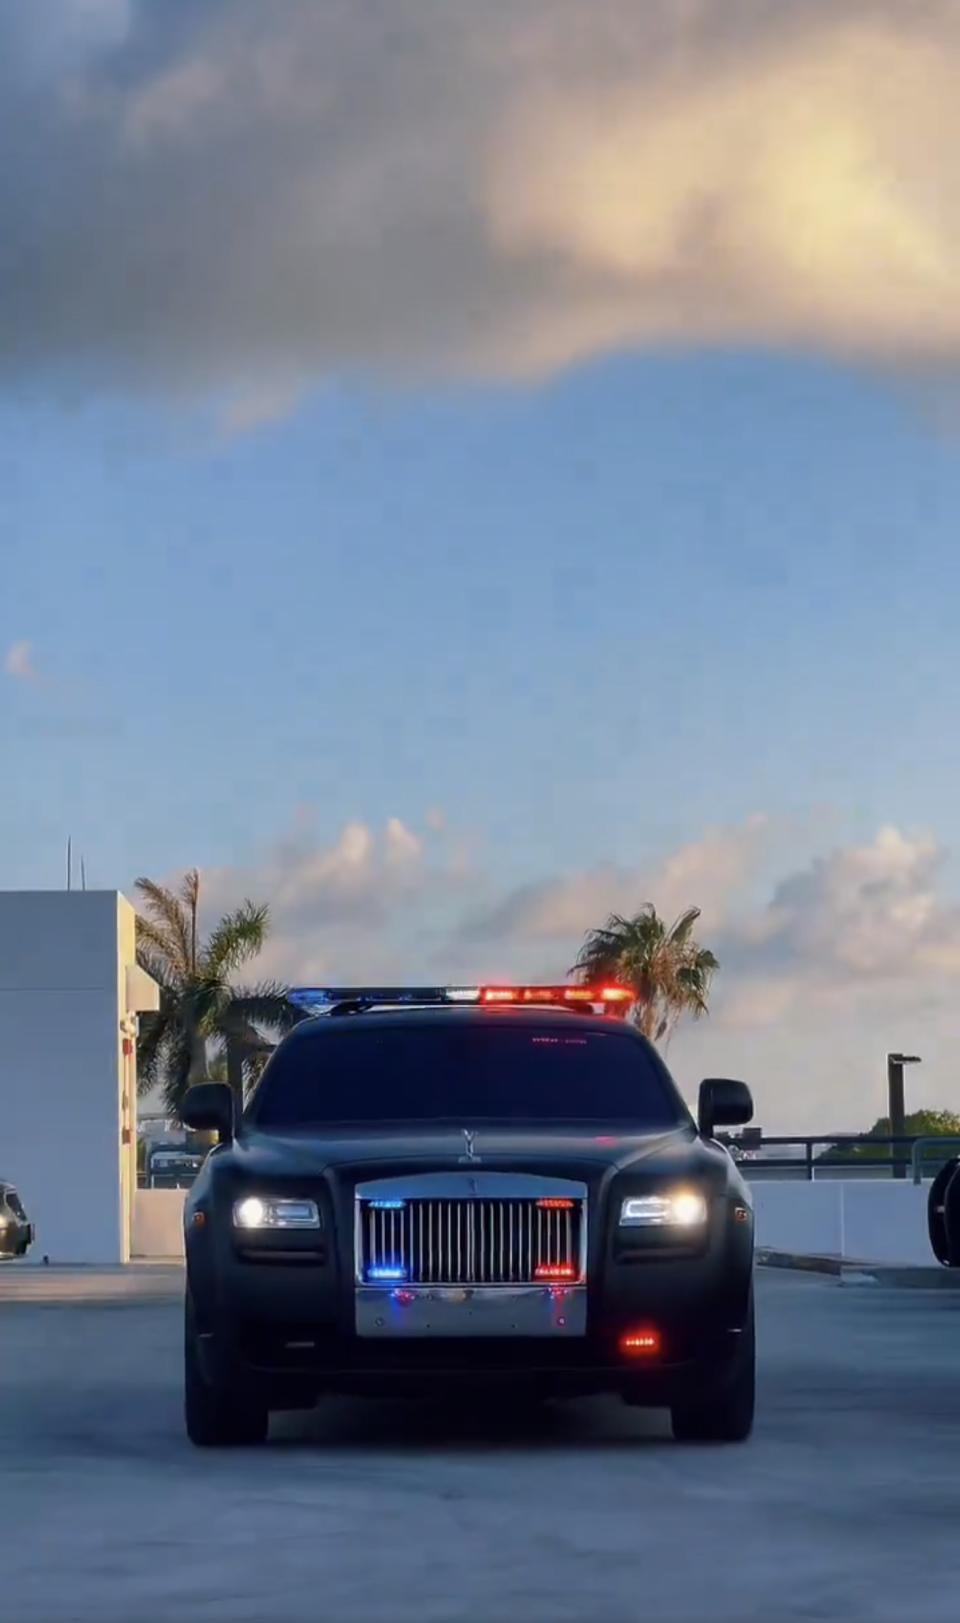 A luxury car with police lights is parked near a building with palm trees in the background, capturing a newsworthy moment